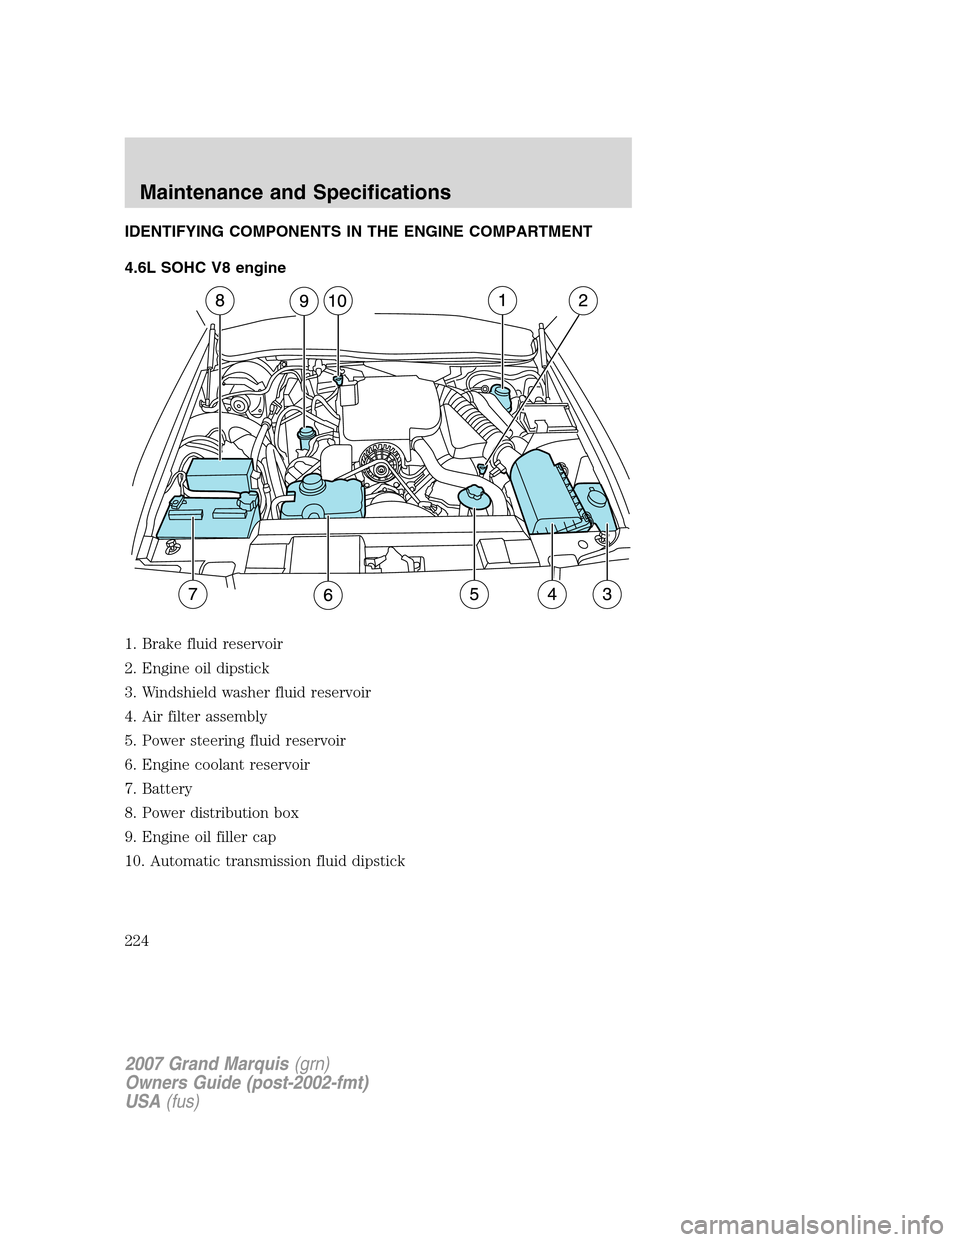 Mercury Grand Marquis 2007  s User Guide IDENTIFYING COMPONENTS IN THE ENGINE COMPARTMENT
4.6L SOHC V8 engine
1. Brake fluid reservoir
2. Engine oil dipstick
3. Windshield washer fluid reservoir
4. Air filter assembly
5. Power steering fluid